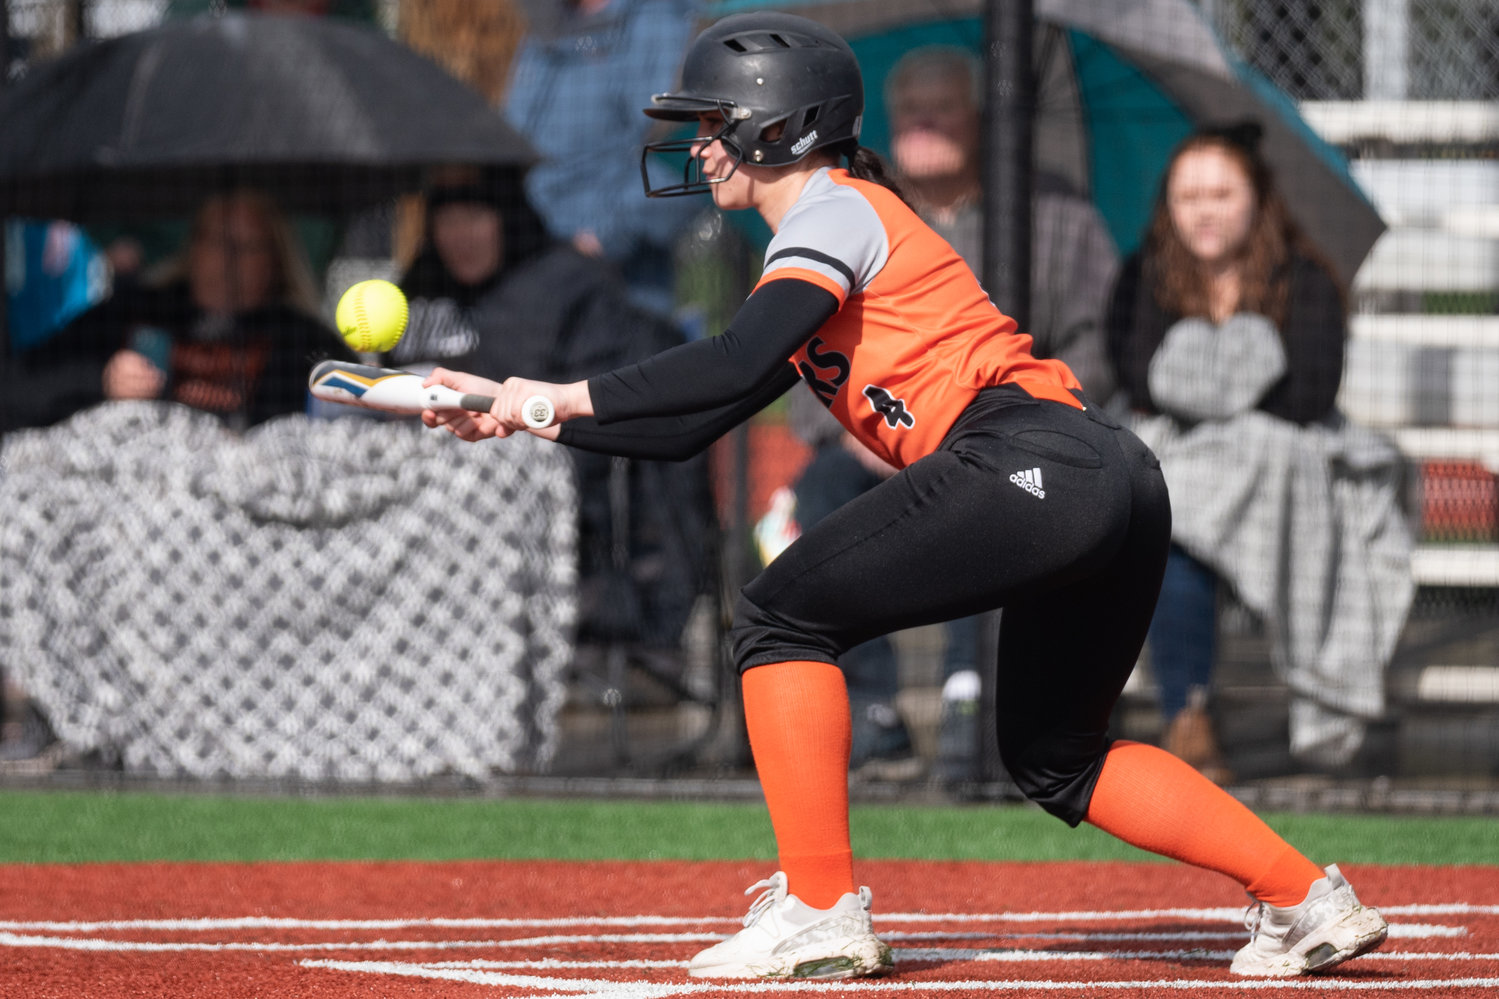 Centralia's Lily Babka lays down a bunt against W.F. West April 26 at Recreation Park.